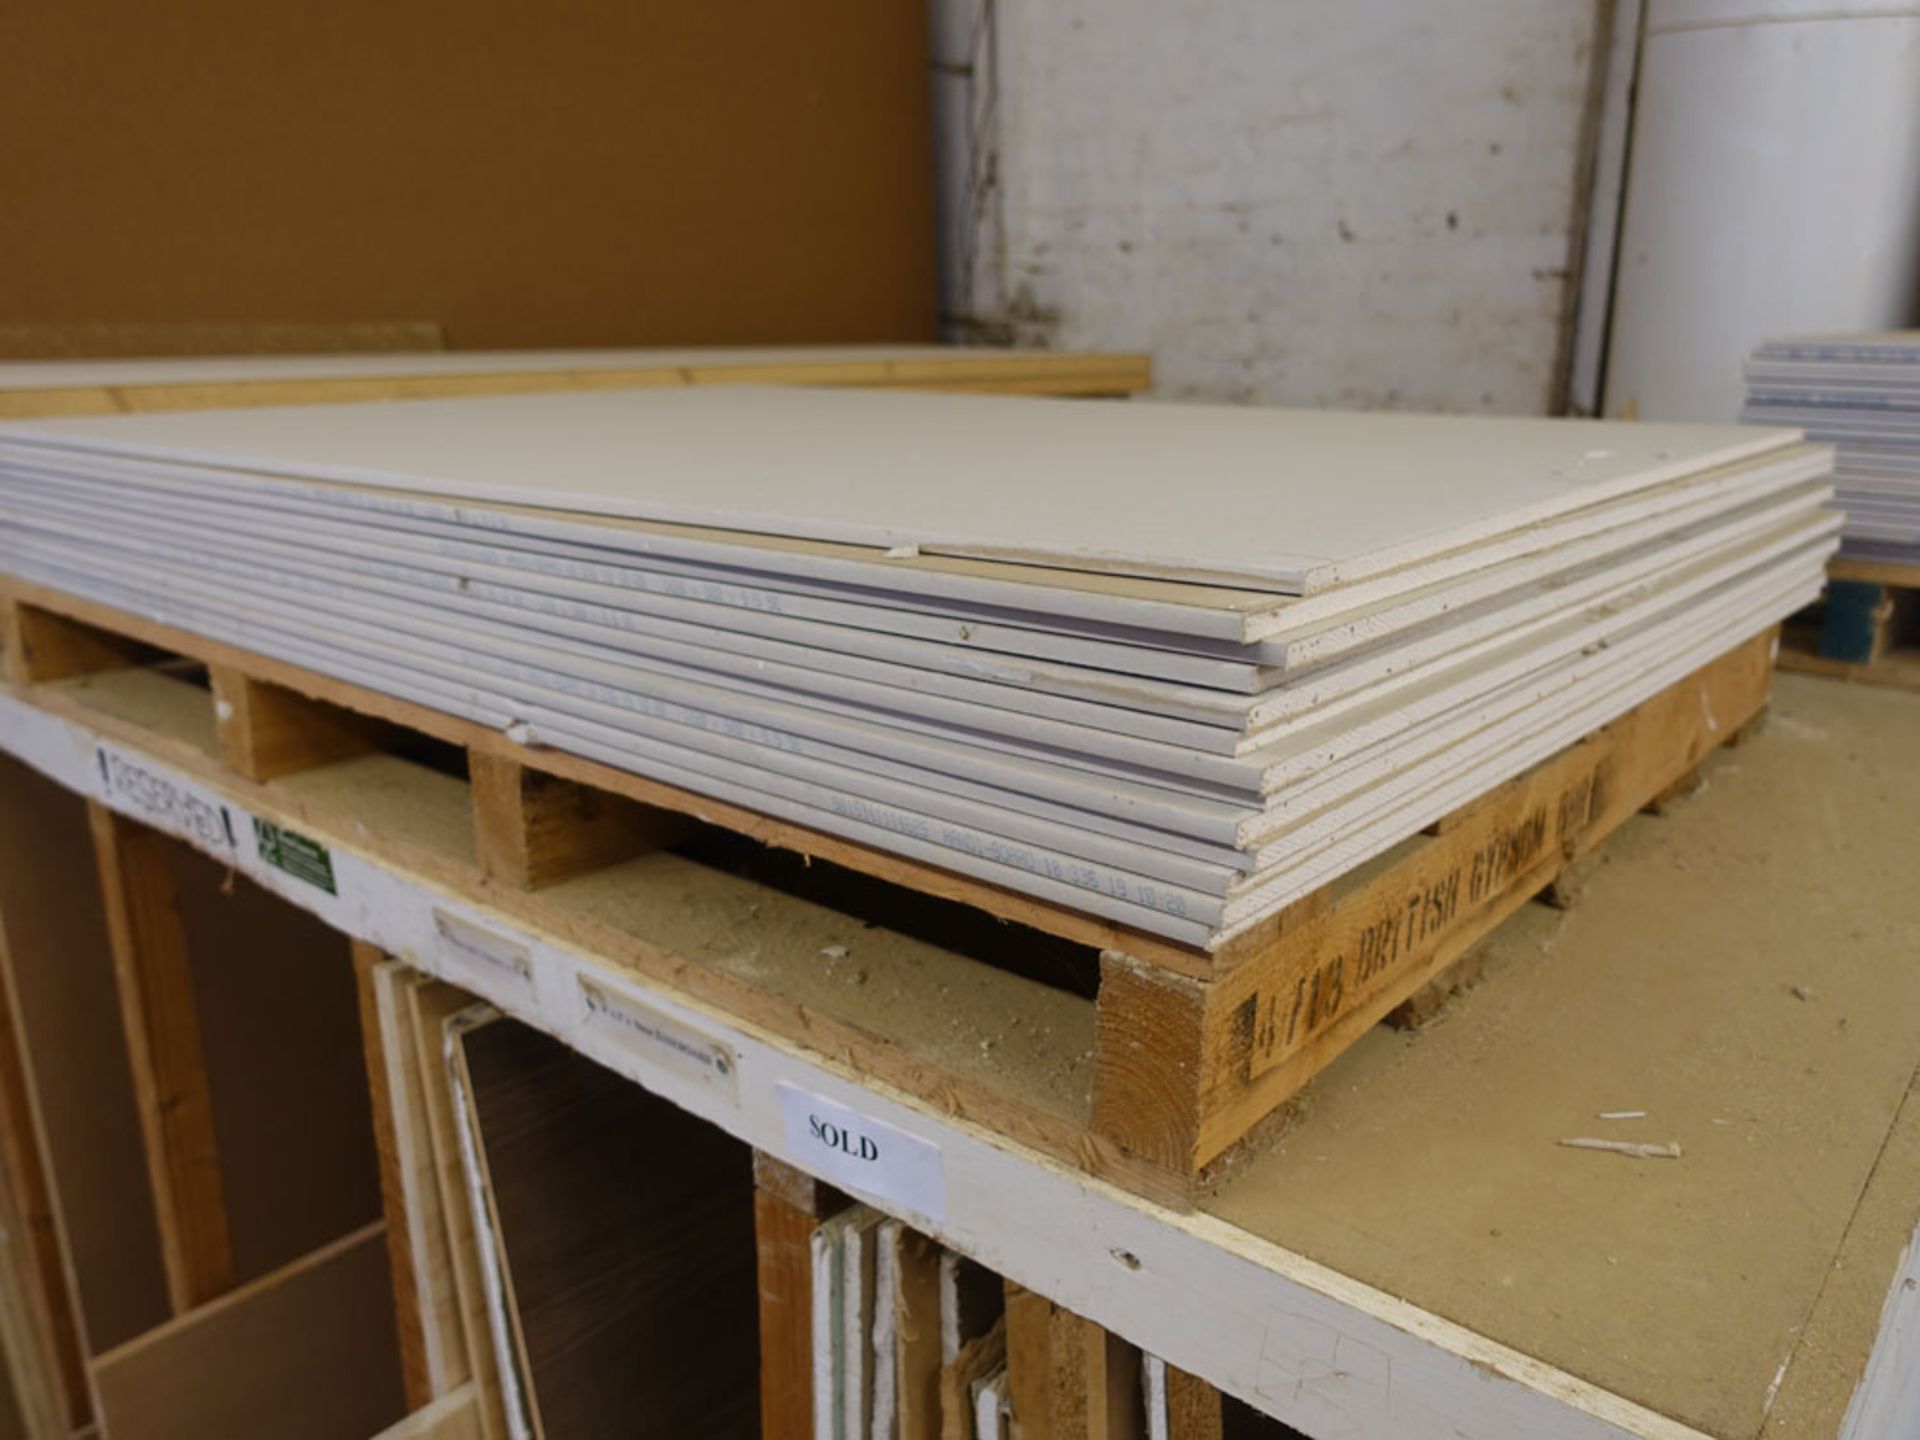 32 sheets of wall board plasterboard. 2 sizes - 1800 x 900 x 9.5 and 1220 x 900 x 9.5 - Image 2 of 4